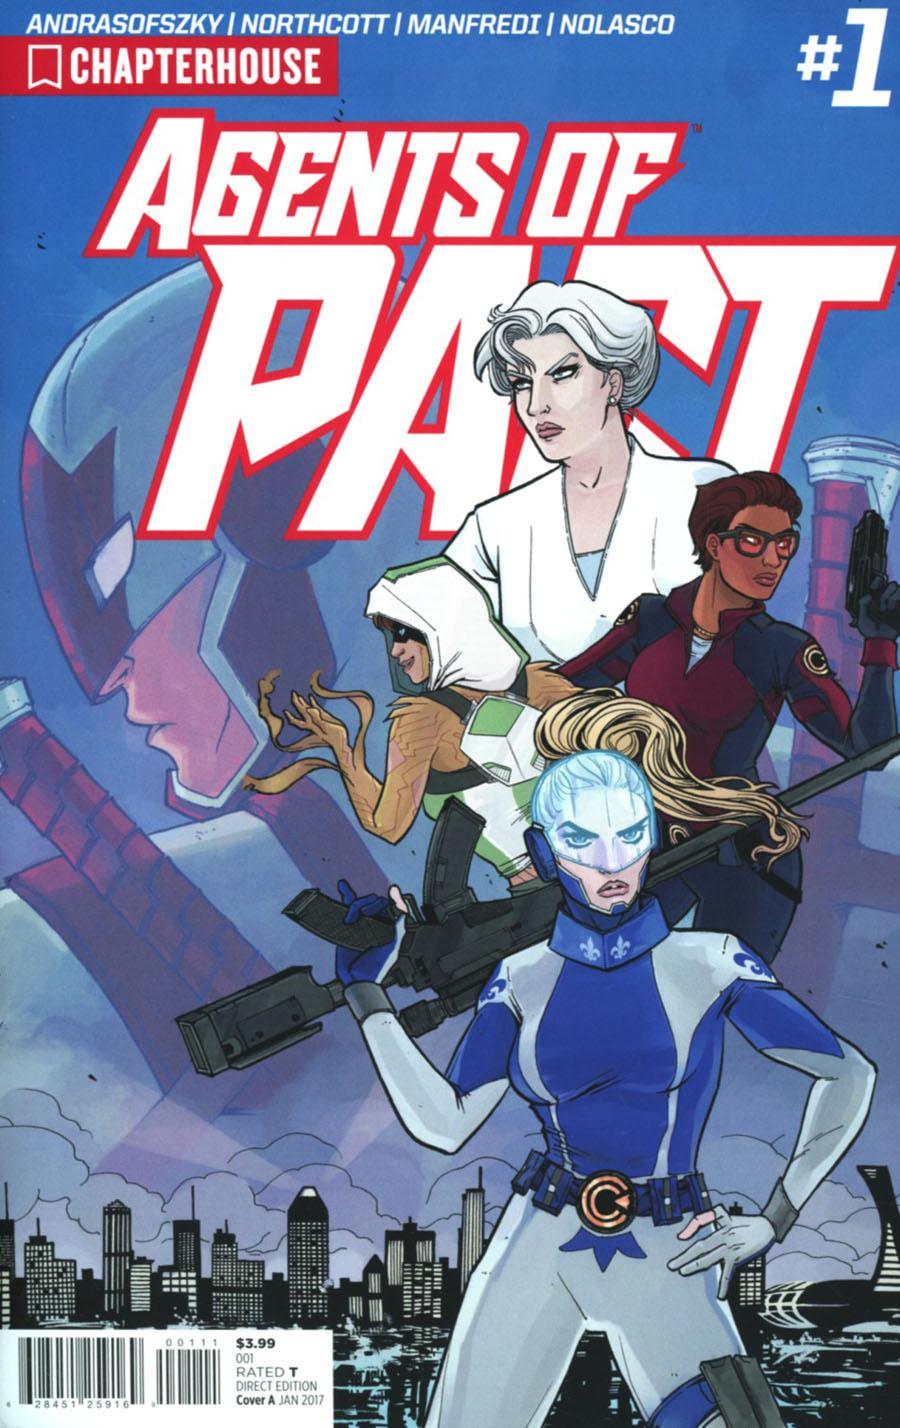 Agents Of PACT Vol. 1 #1